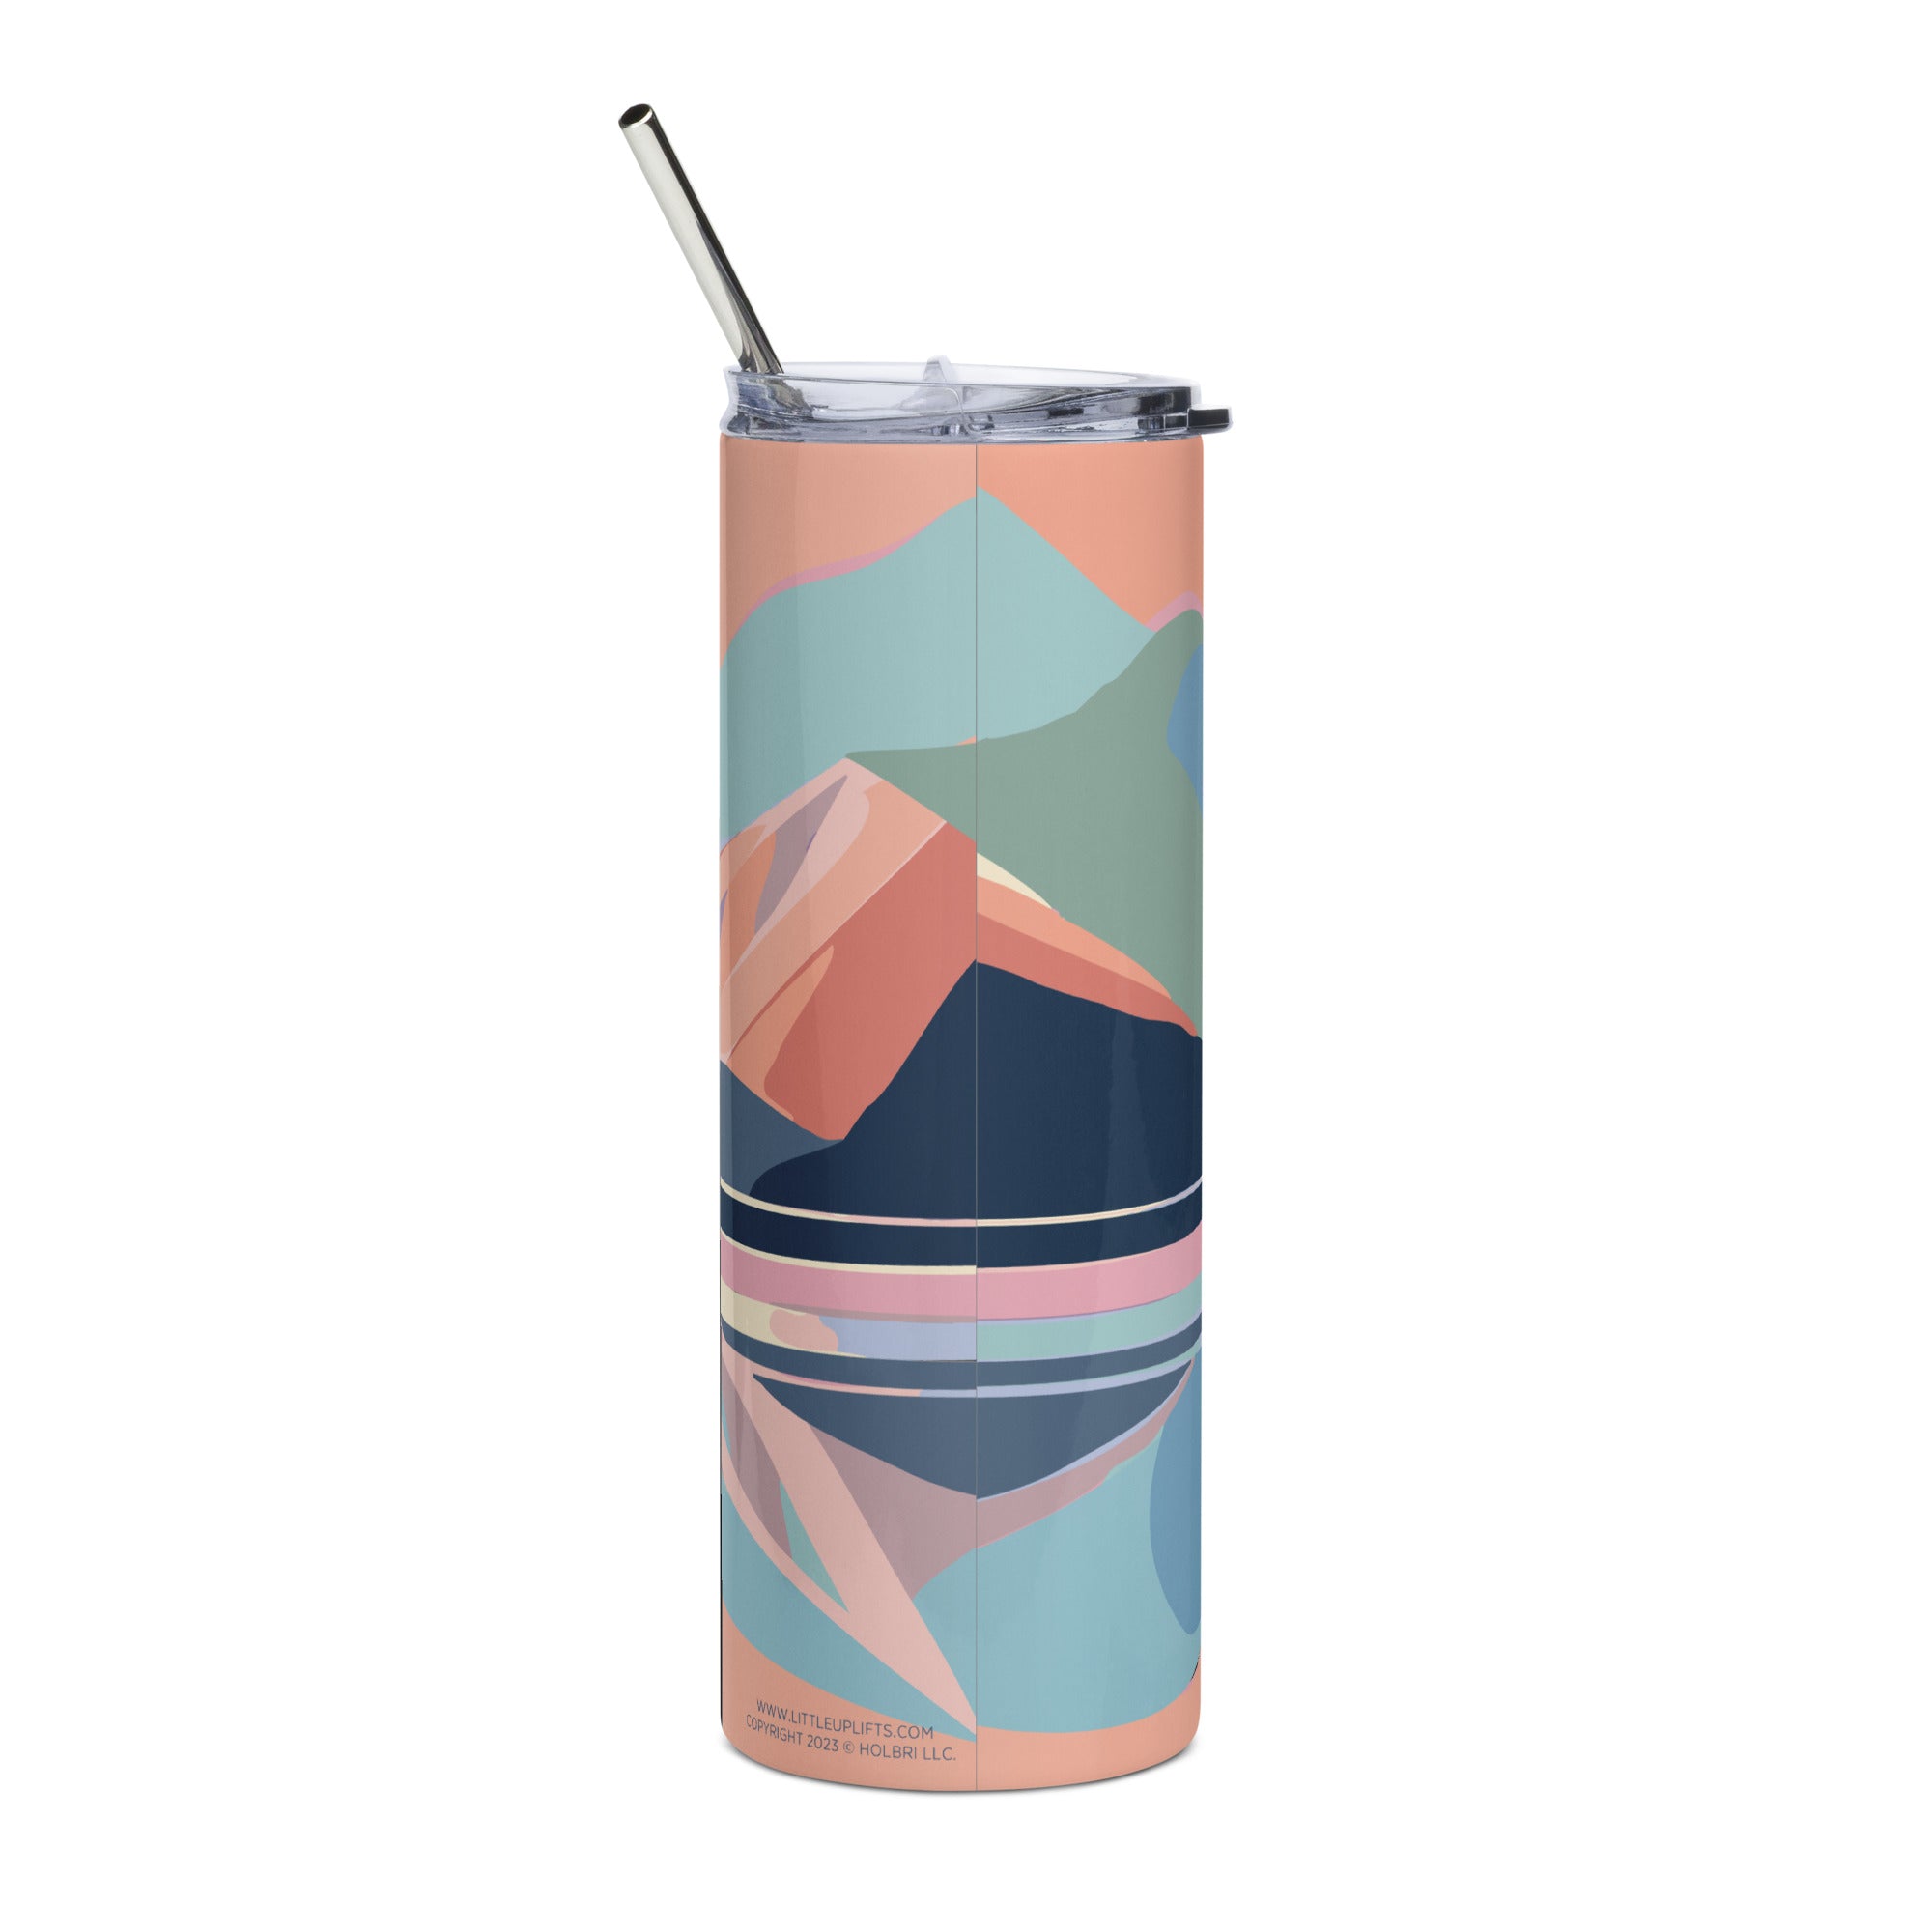 &quot;Show up, Step out, &amp; Shine&quot; Boho Stainless Steel Tumbler